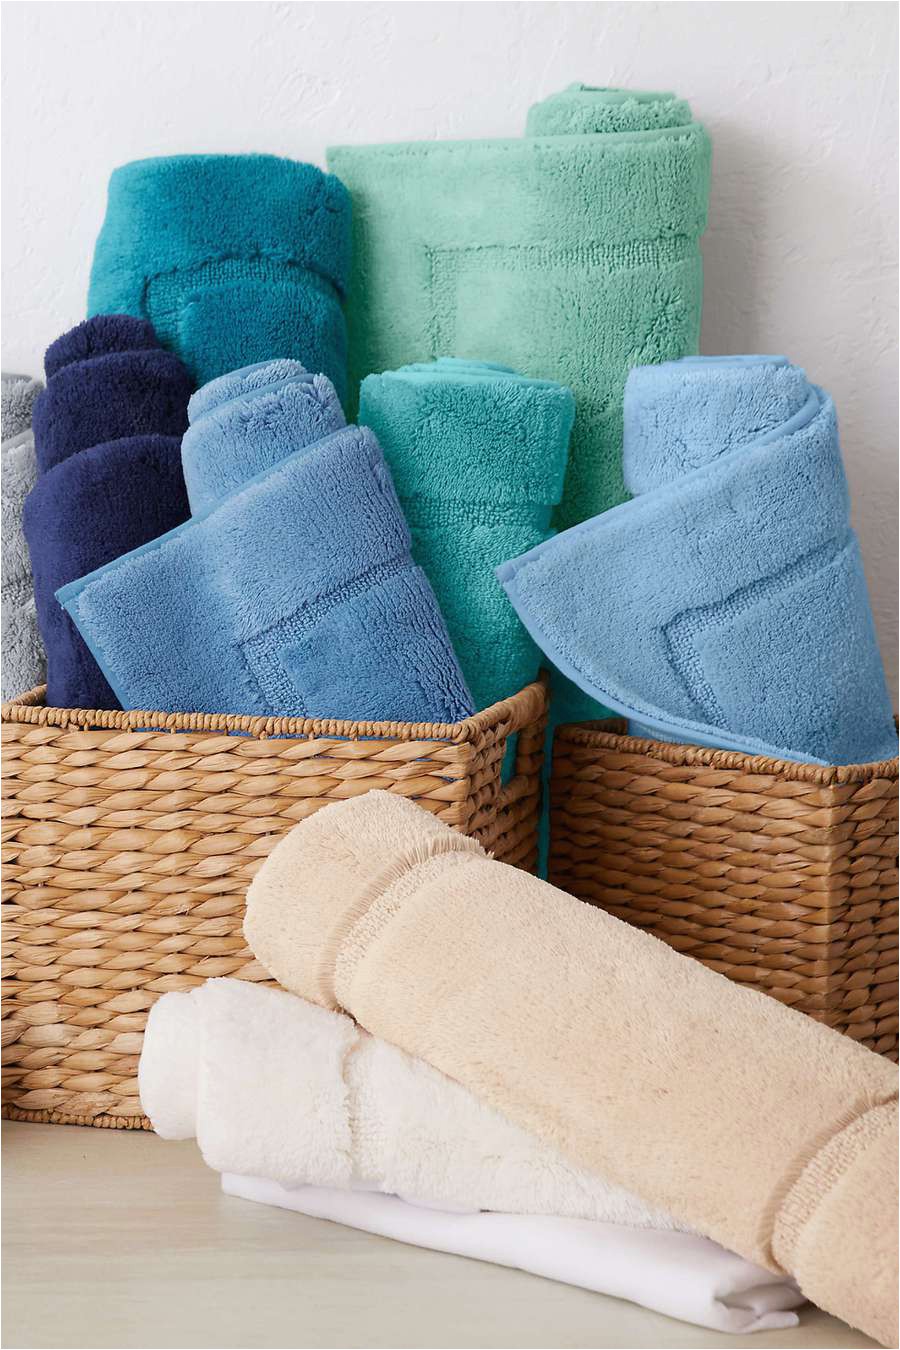 Bath Rugs without Rubber Backing the 8 Best Bath Mats Of 2020